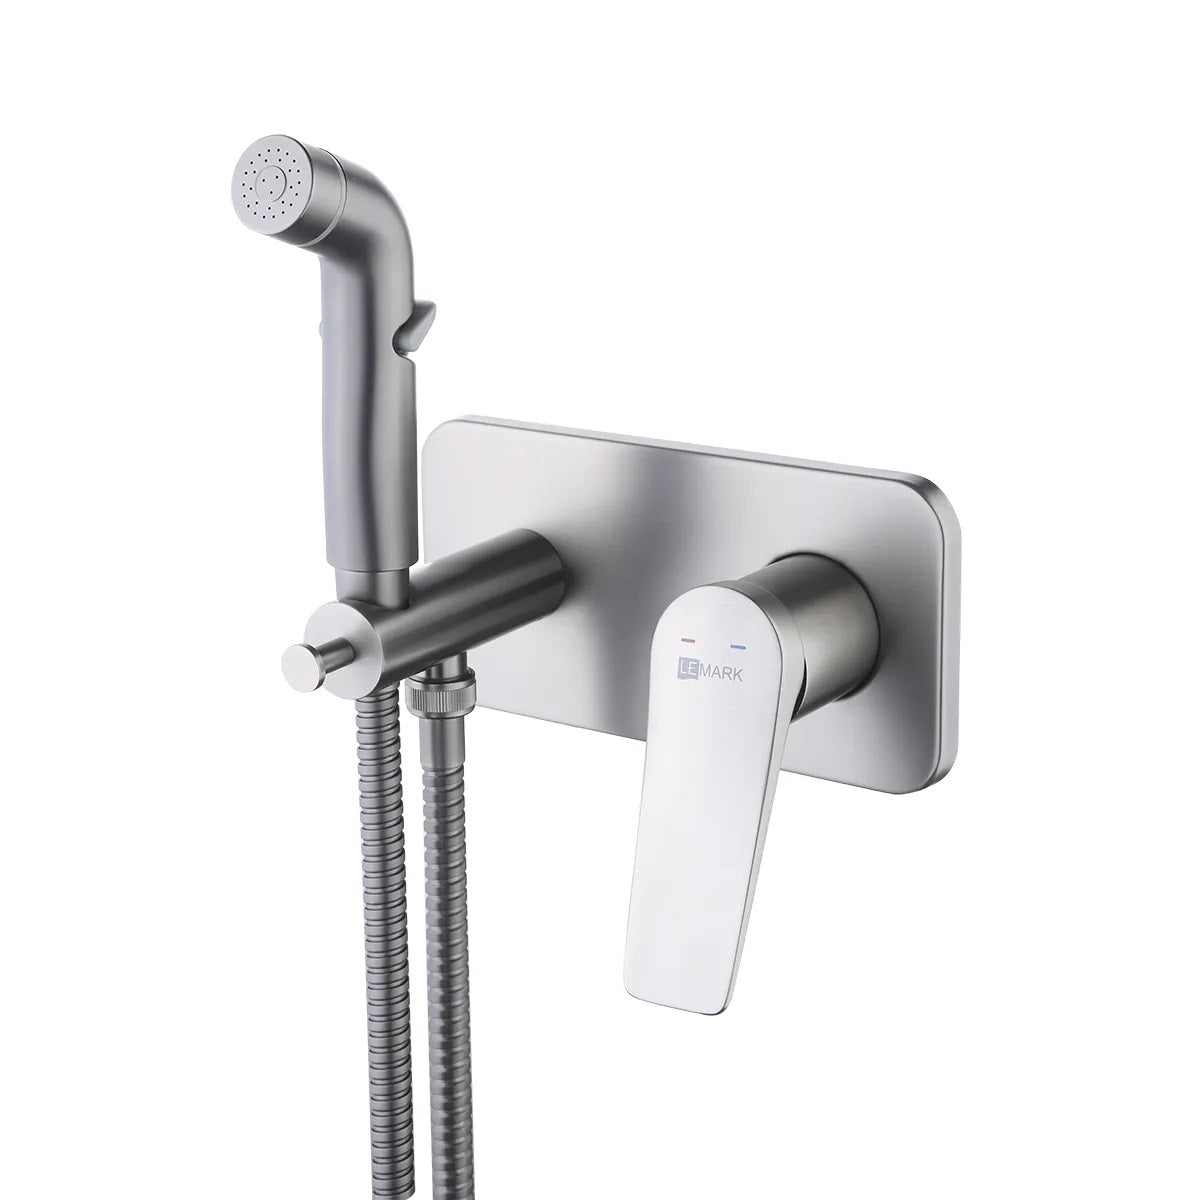 Built-in Faucet with bidet shower LEMARK LM3720GM "BRONX"